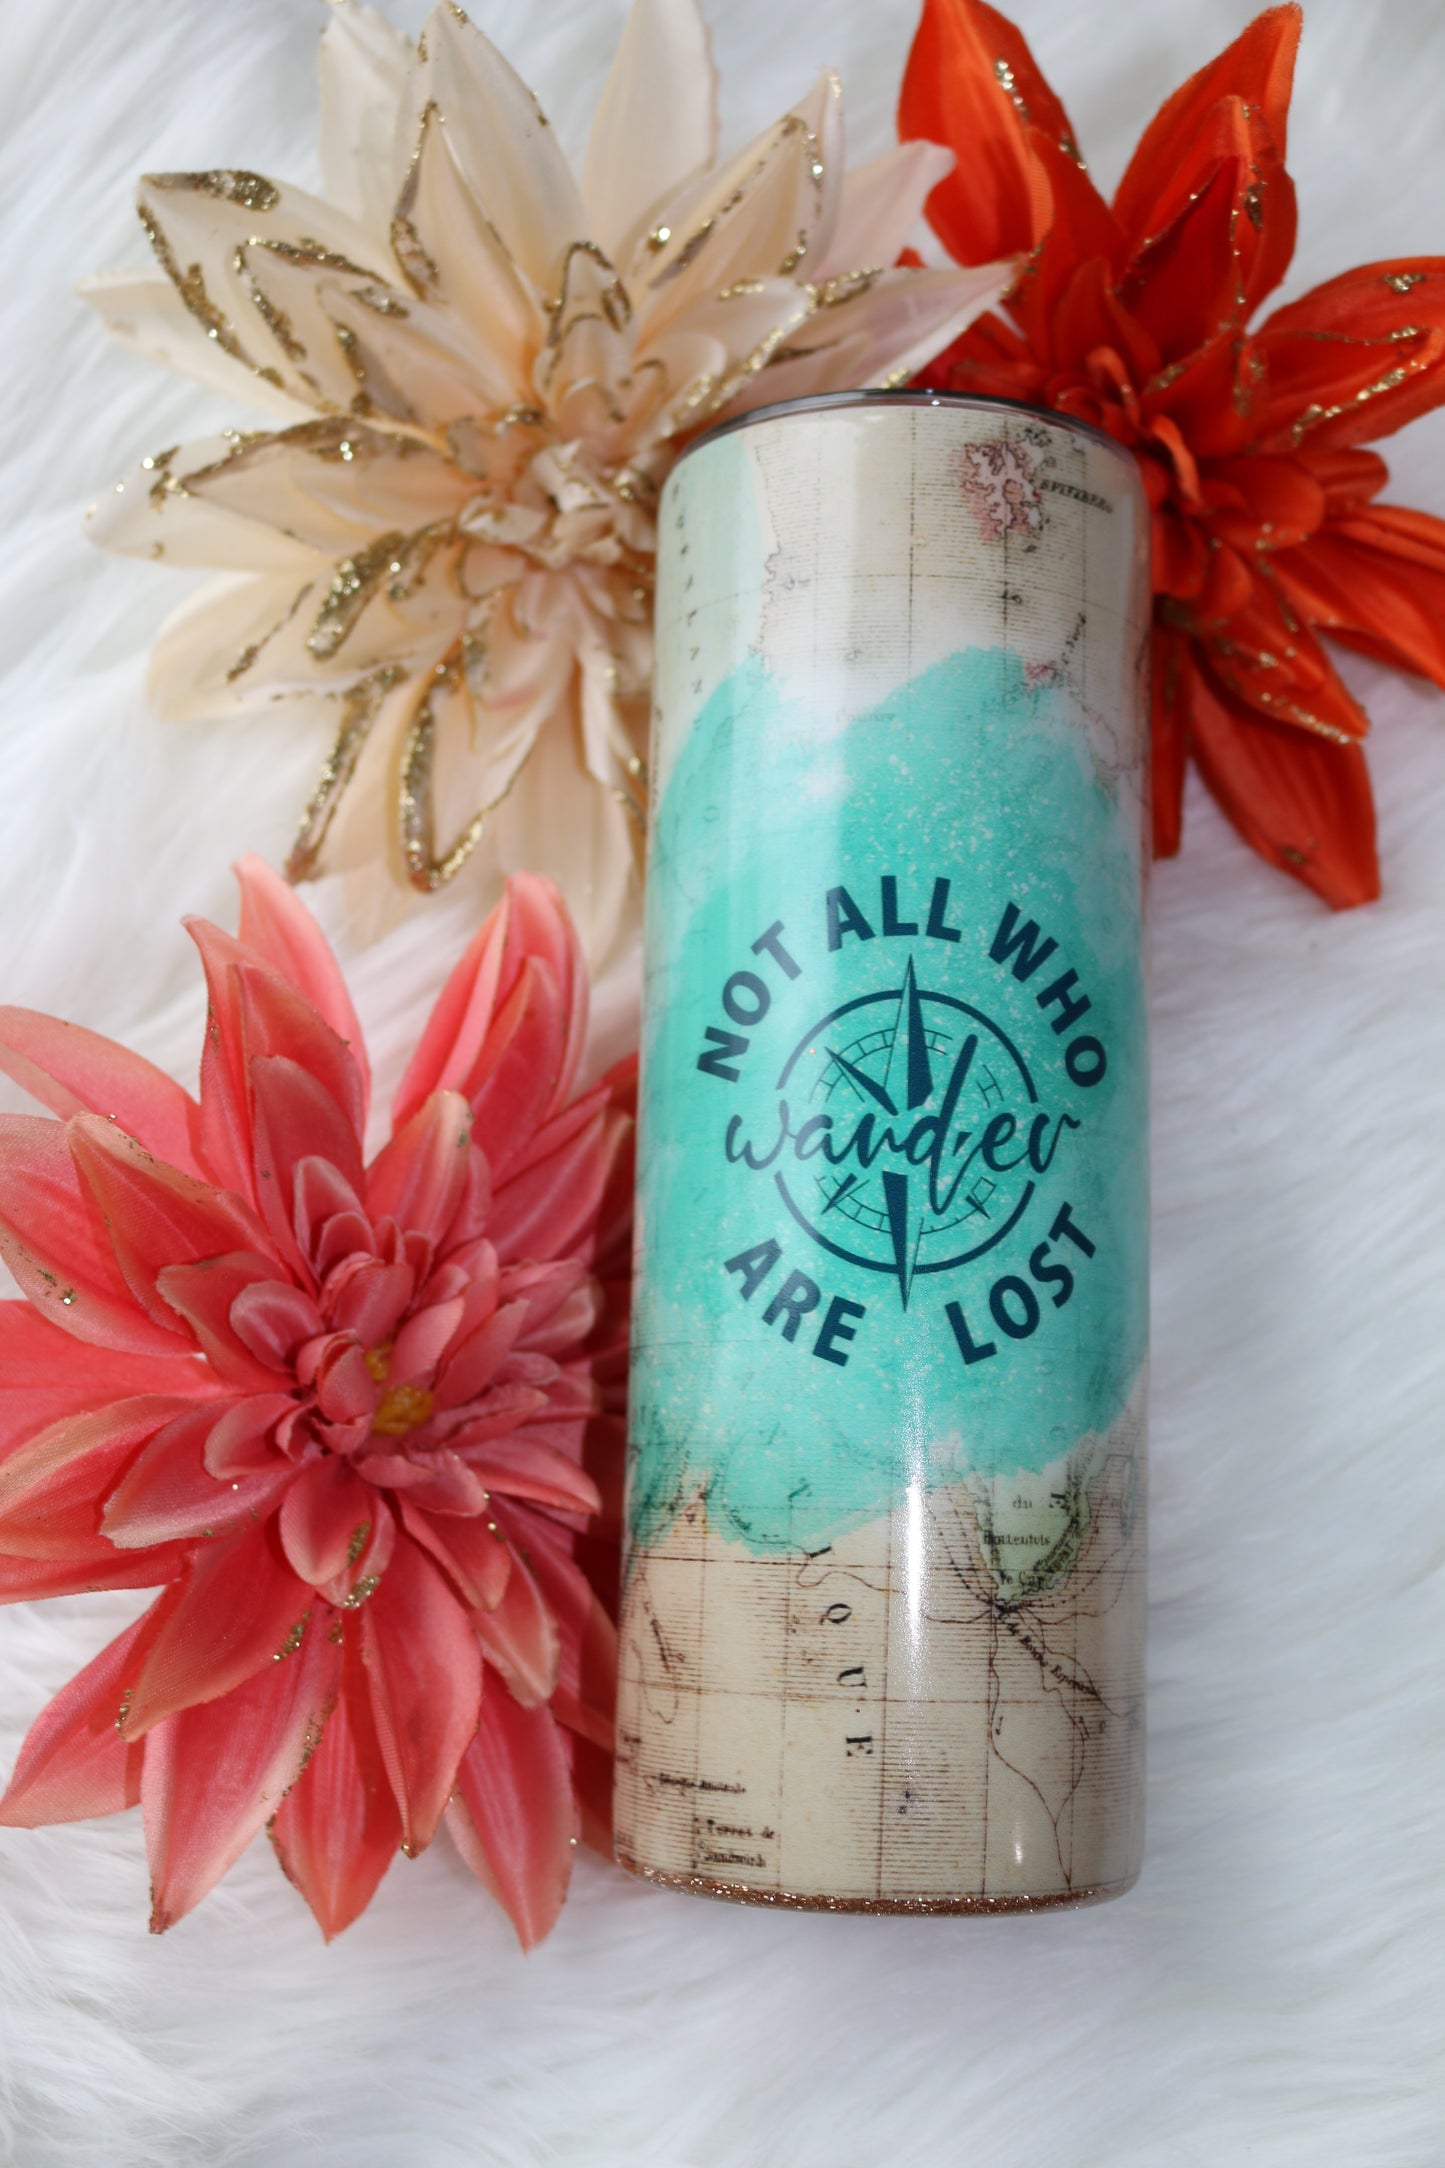 20 oz "Not All Who Wander Are Lost" Stainless Steal Tumbler